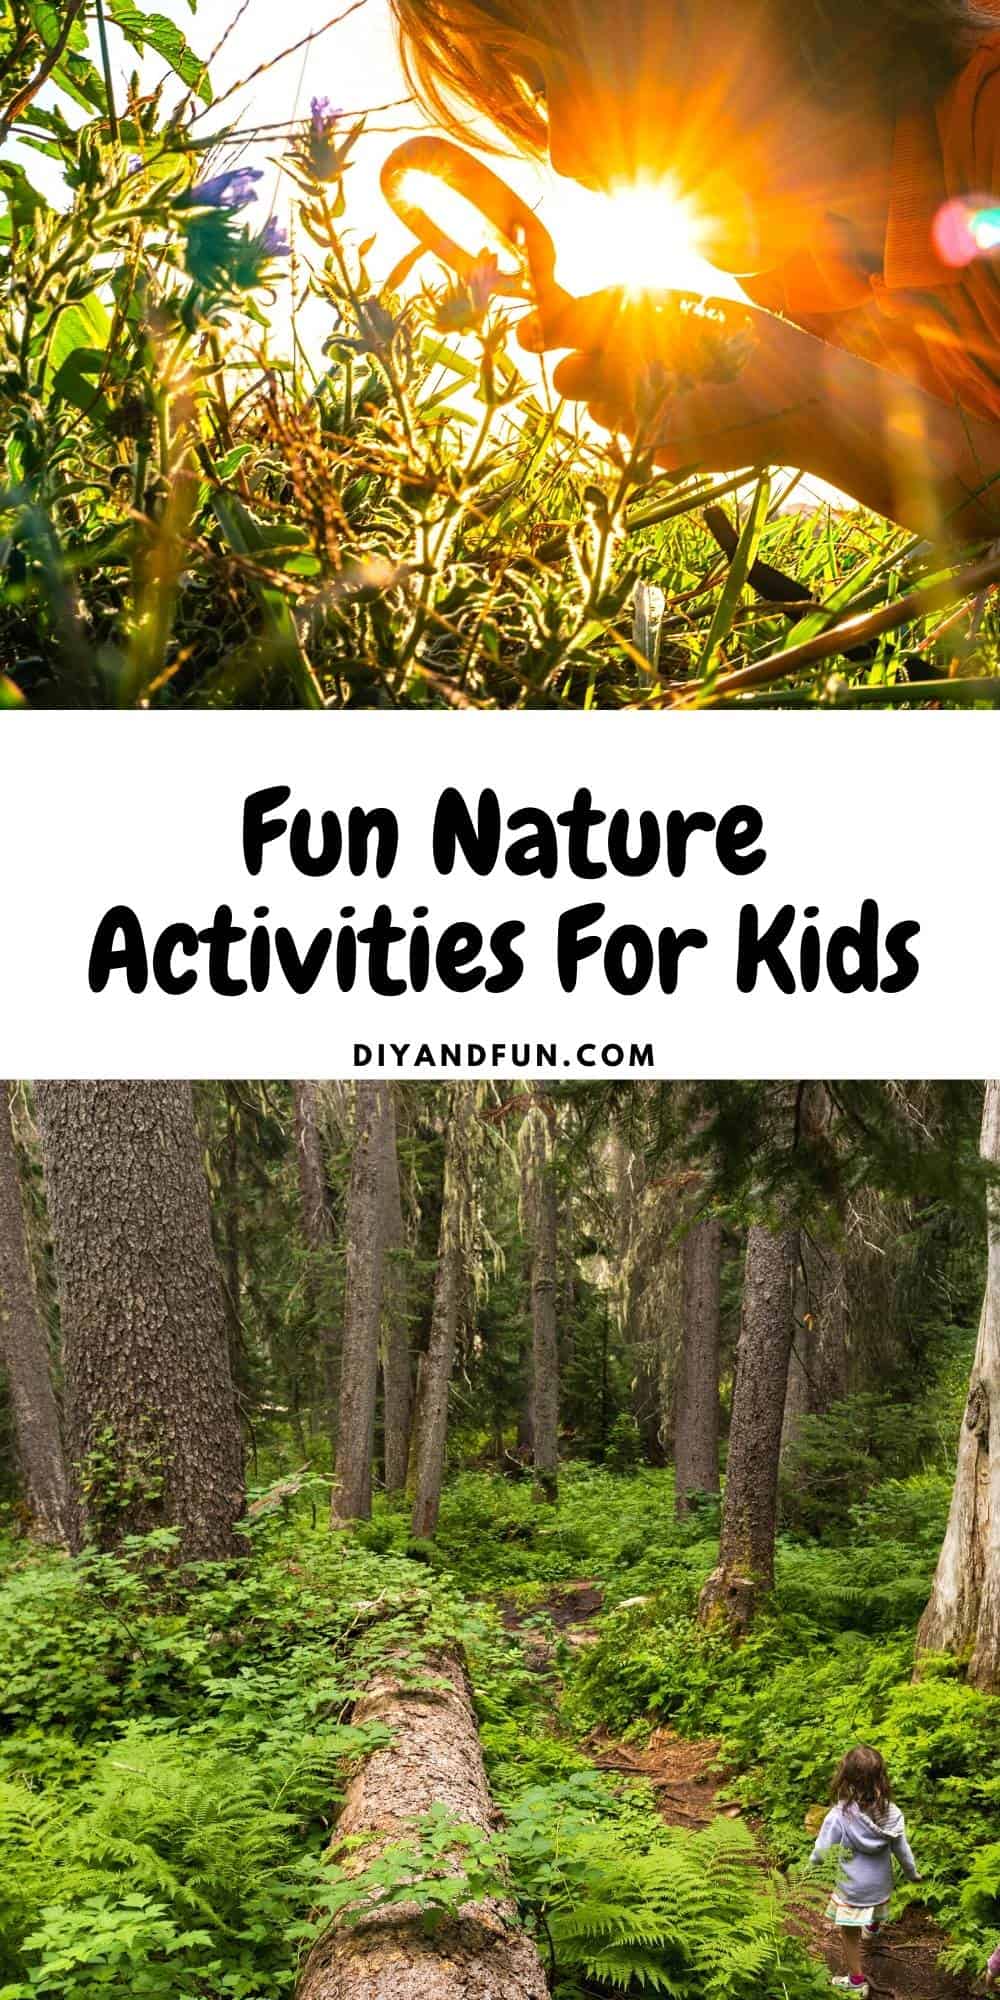 Fun Nature Activities For Kids, a listing of 12 fun outdoor ideas especially for children, that are free or cheap to do.